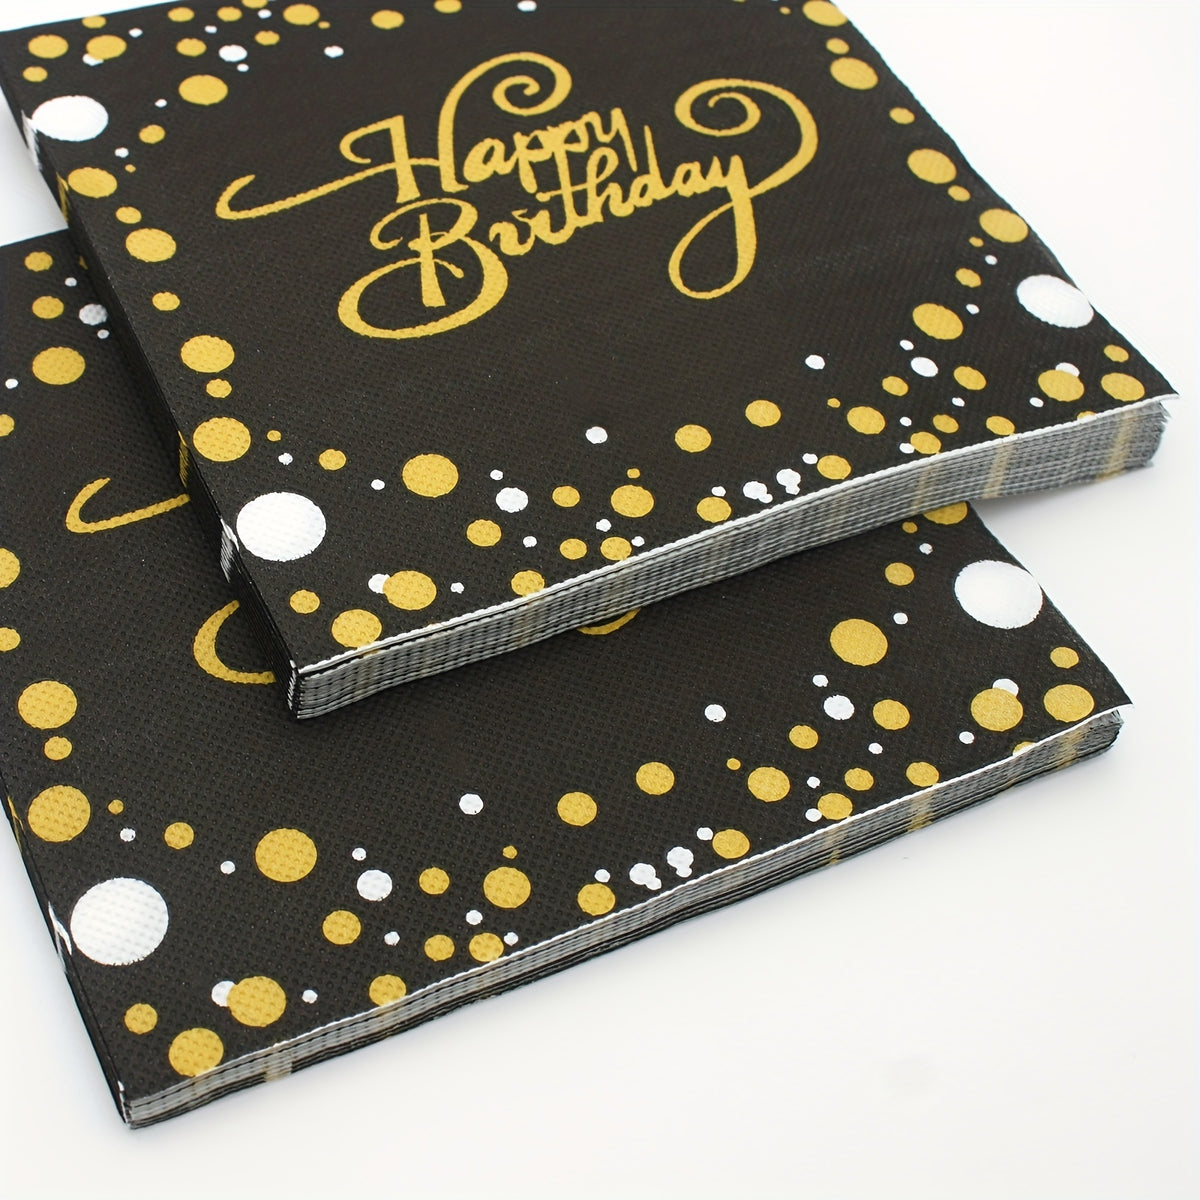 a black and gold dotted birthday book with a happy birthday written on it